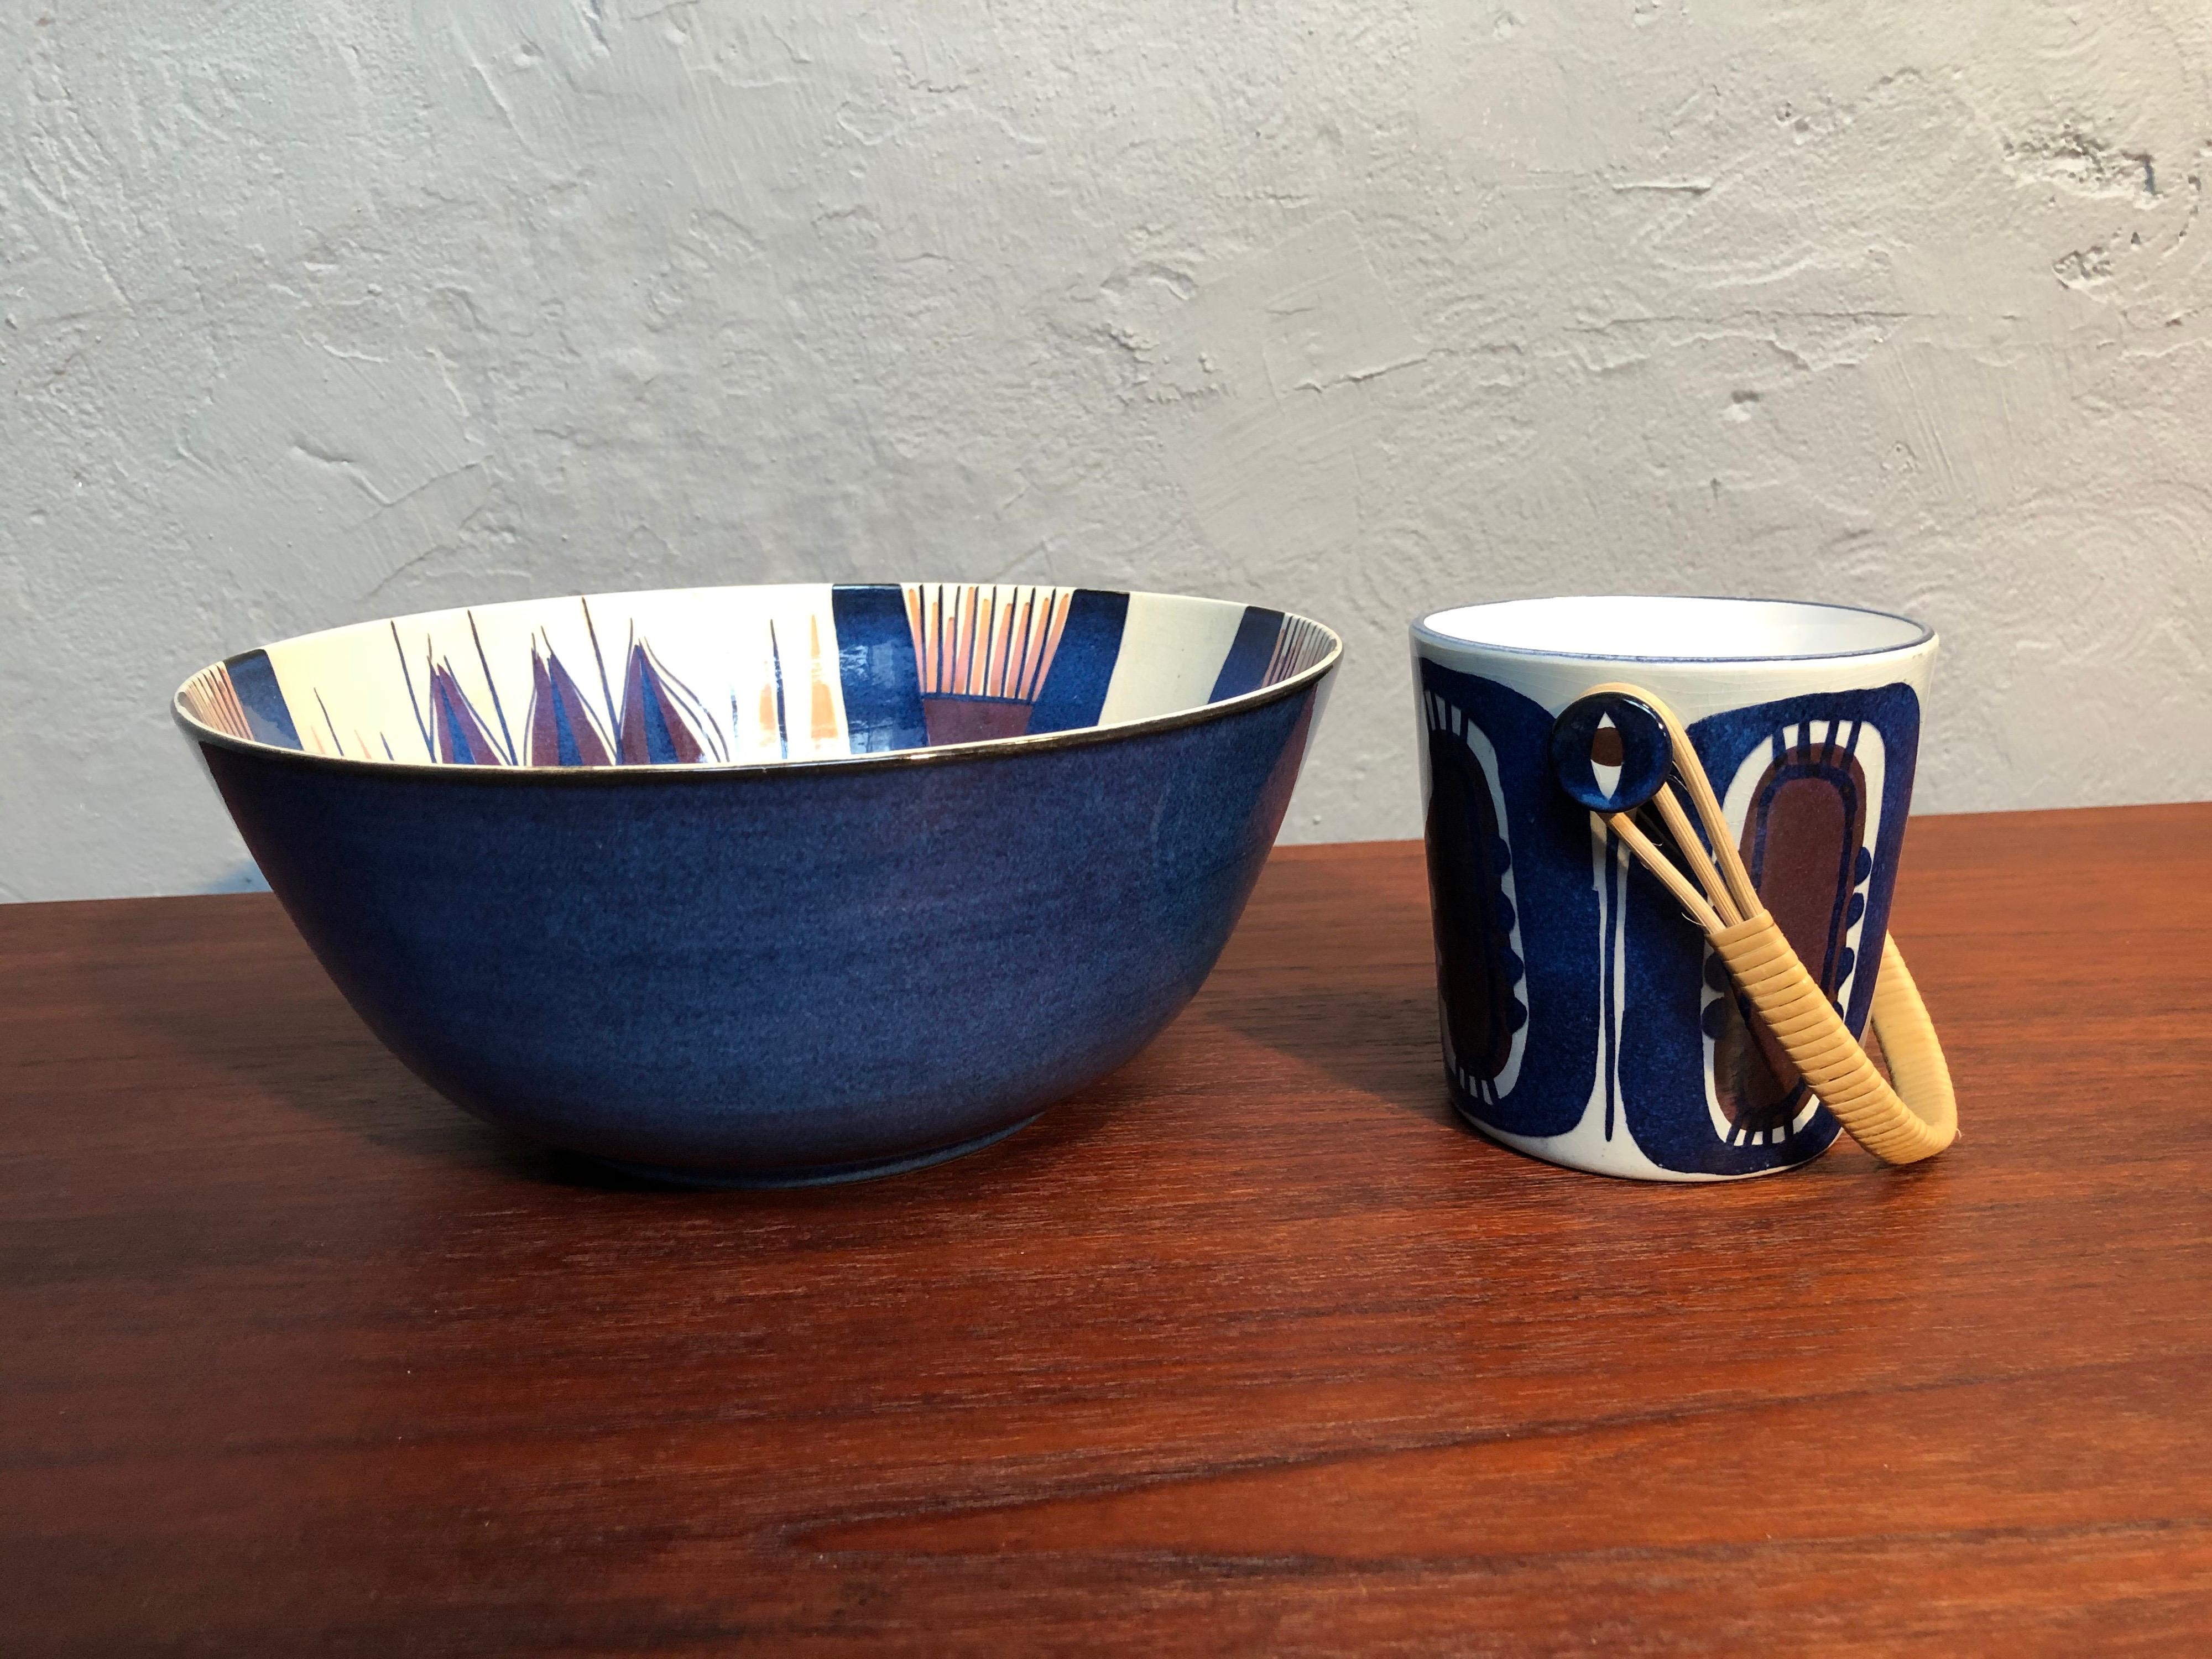 Vintage pottery bowl and ice bucket from the series Tenera by Inge-Lise Koefoed for Aluminia of Denmark. 
In great vintage condition with no cracks or chips. 
Deep colors of blue and torquise which were very popular during that period.